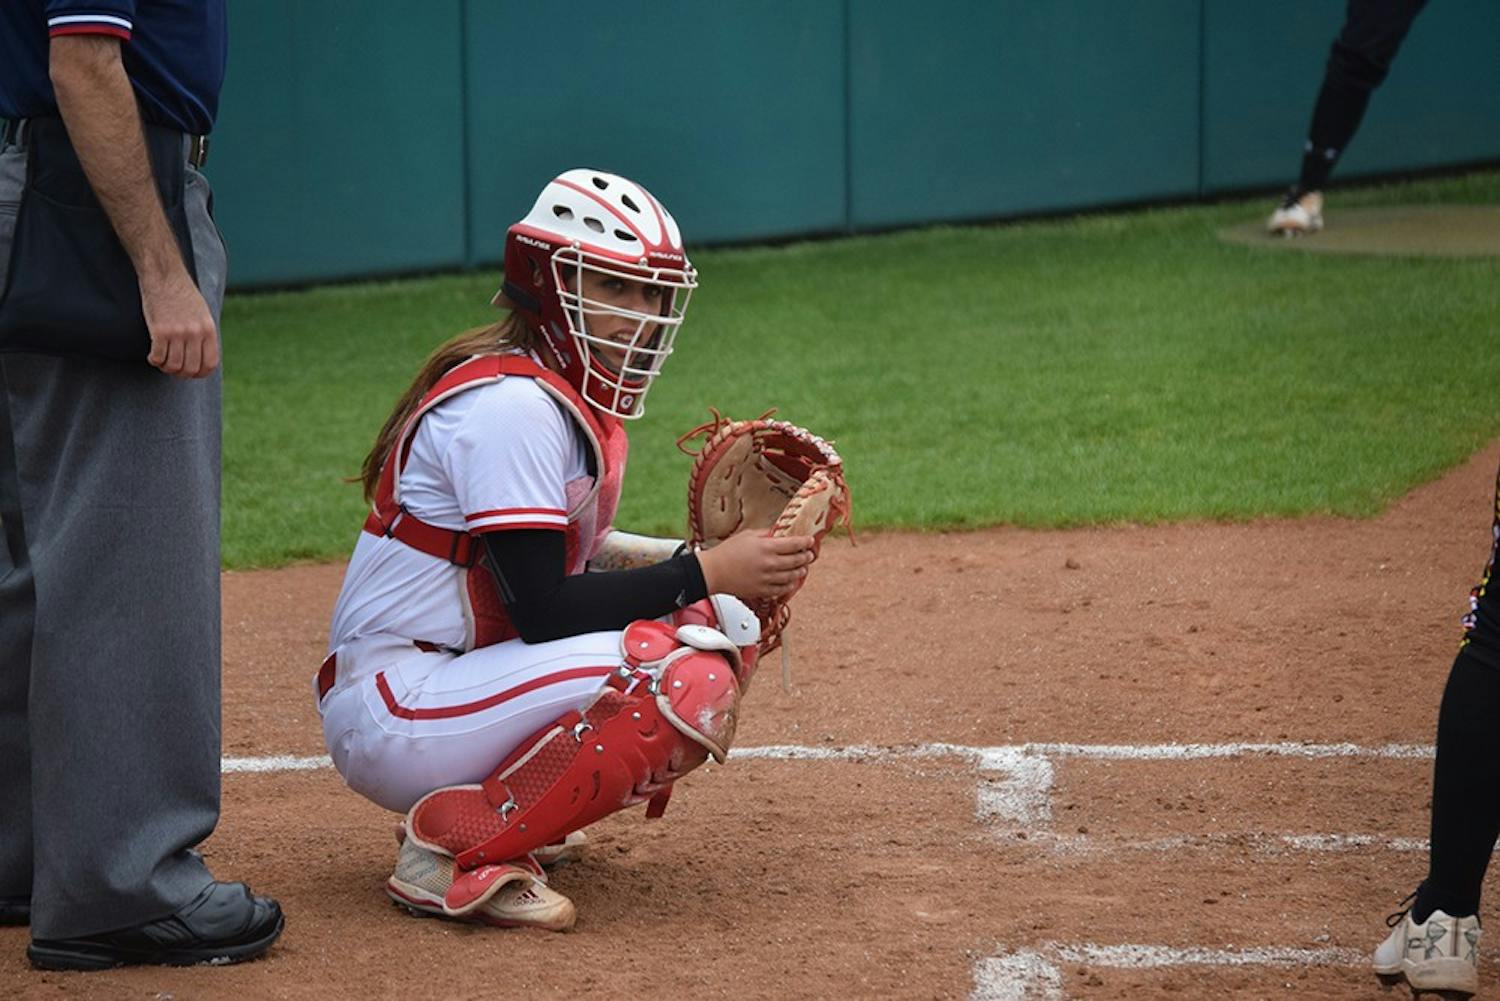 Freshman catcher Bella Norton looks to the dugout to see what pitch to call on Friday, April 21, 2017. The Hoosiers defeated the Terrapins in all three games in Bloomington.